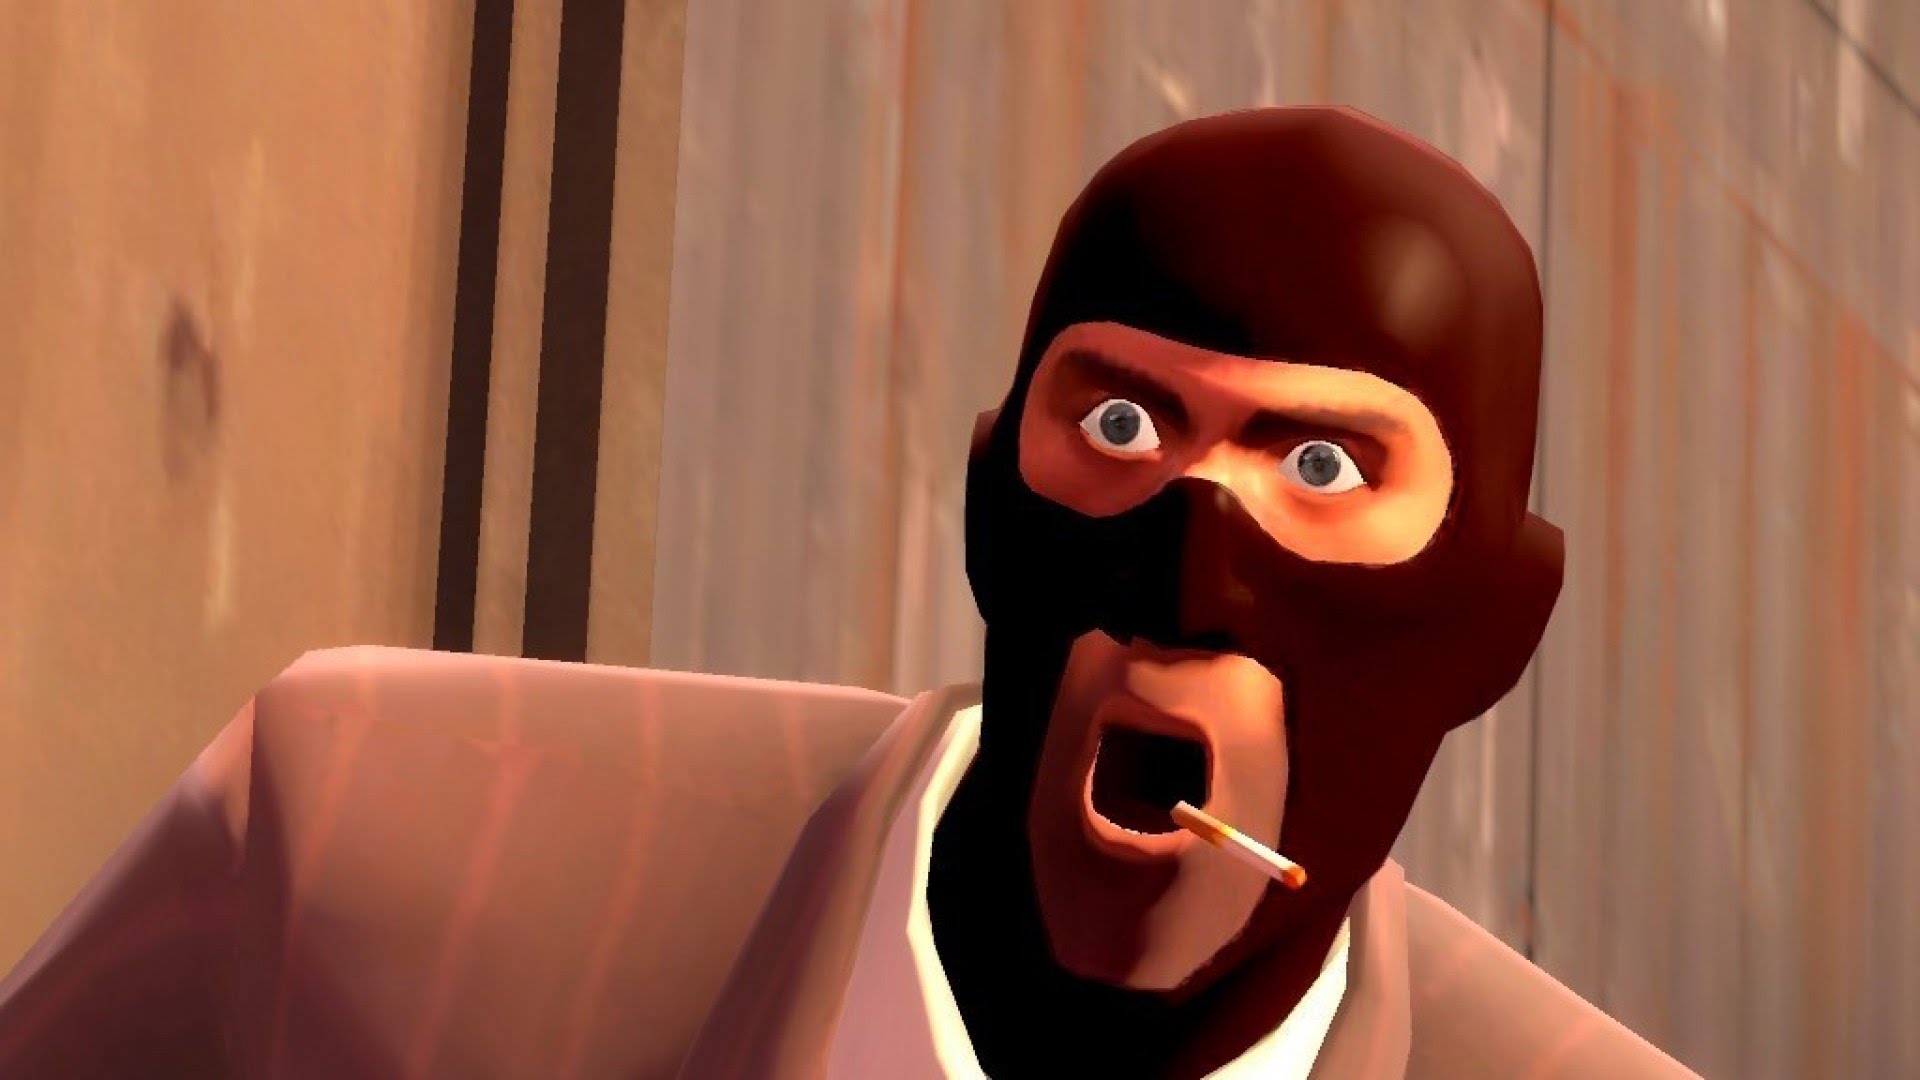  Make the cast of TF2 recite old memes with this AI text-to-speech tool 